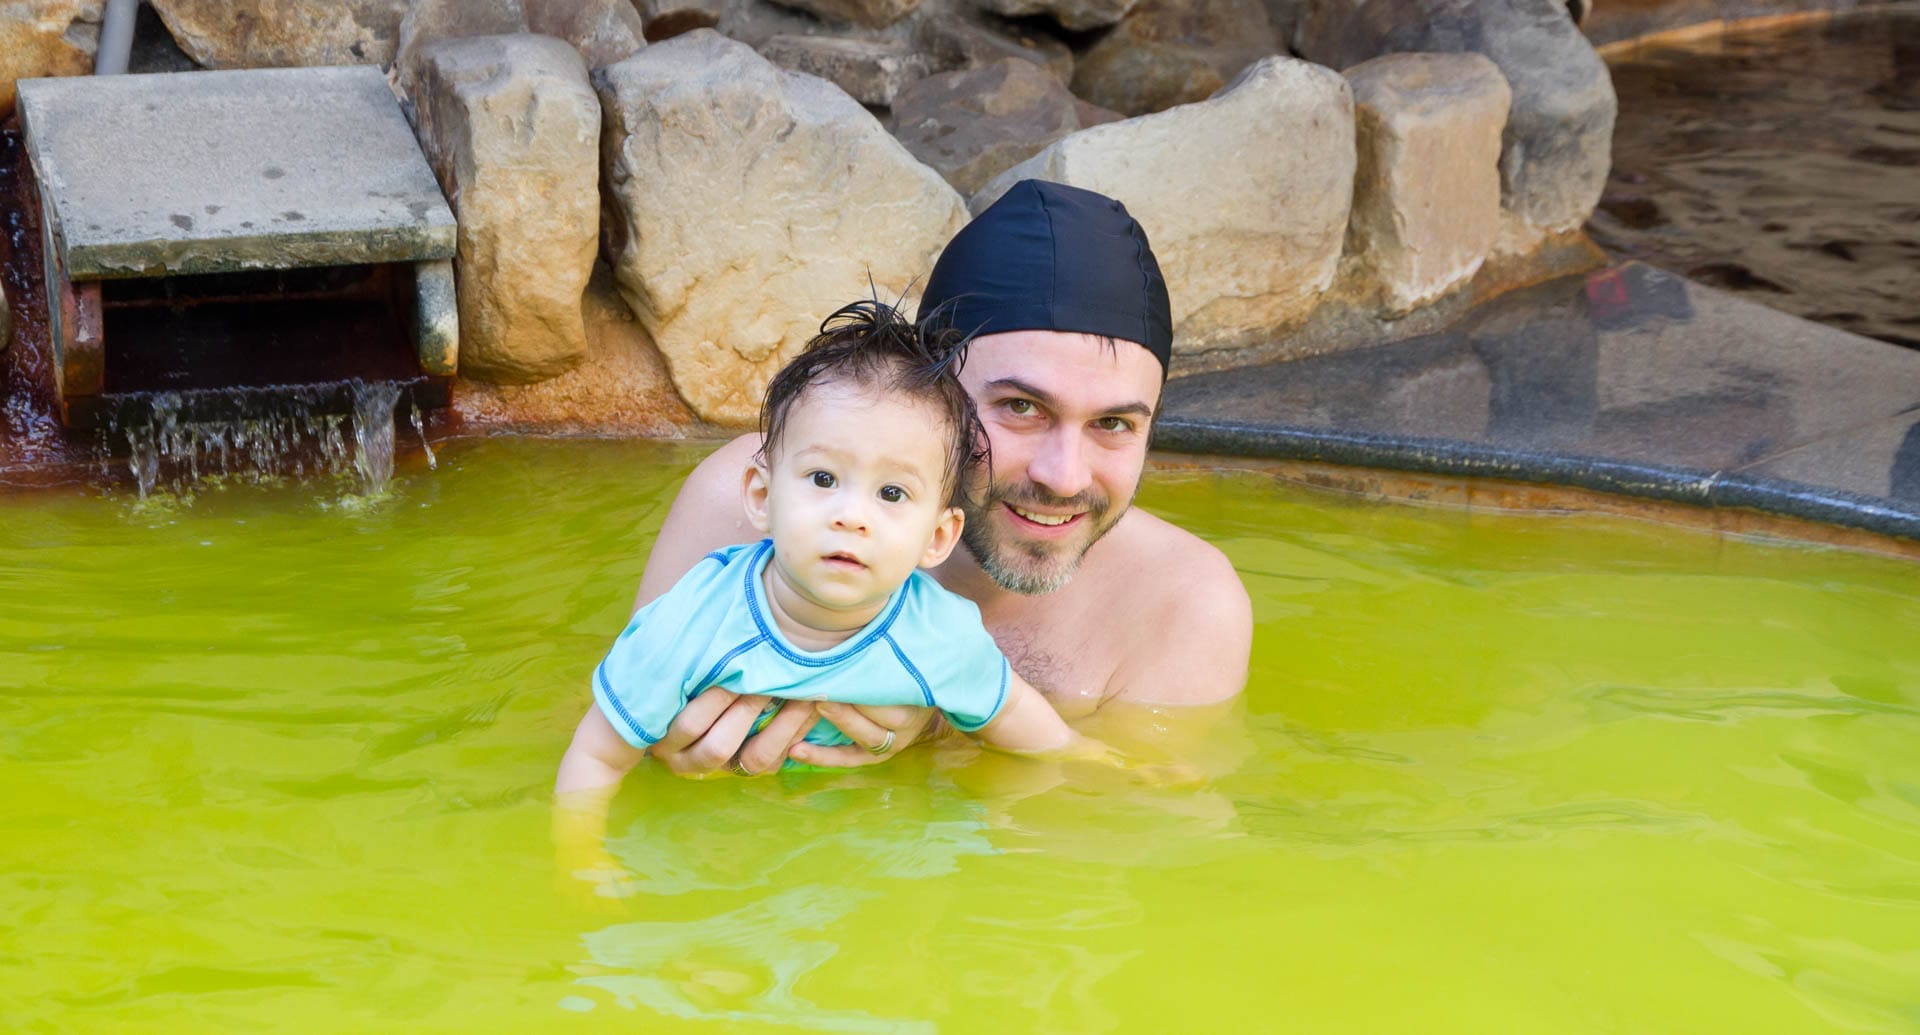 Nick Kembel holding his young son while bathing in a bright yellow hot spring tub, both wearing swimming caps